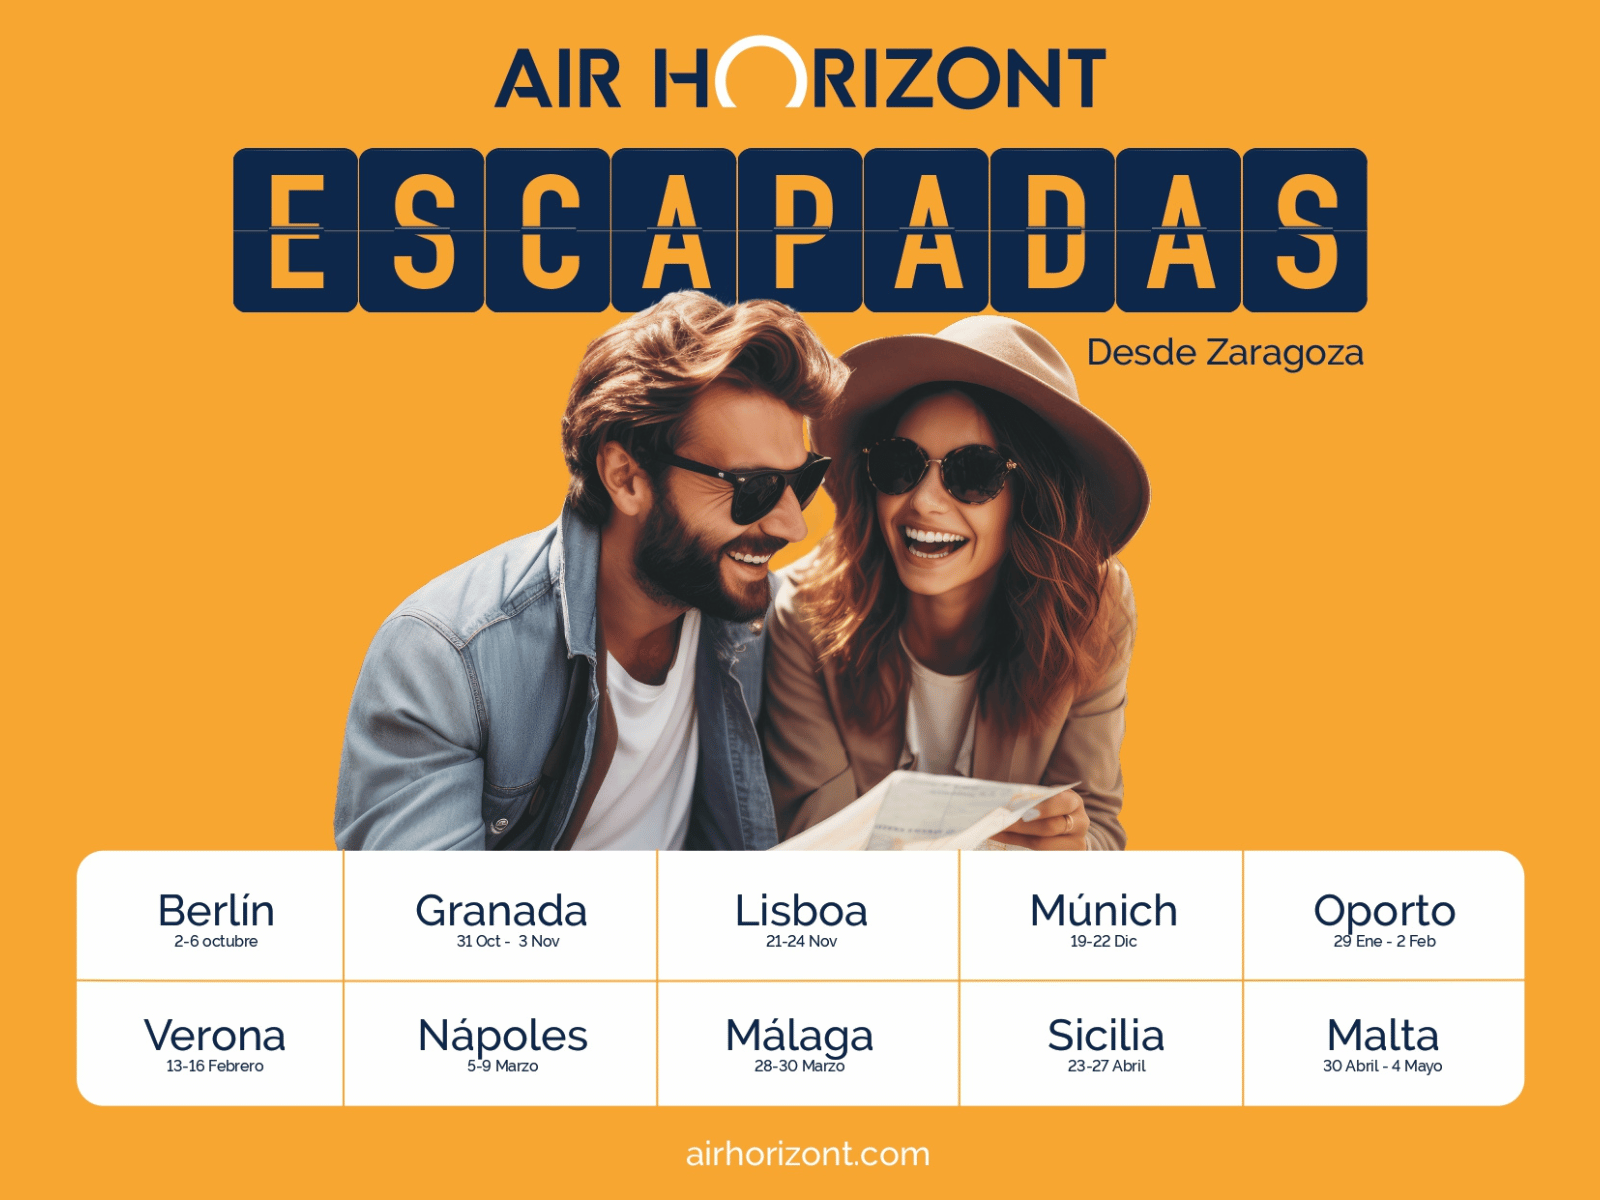 Introducing the Fourth Edition of the Air Horizont Getaways Program